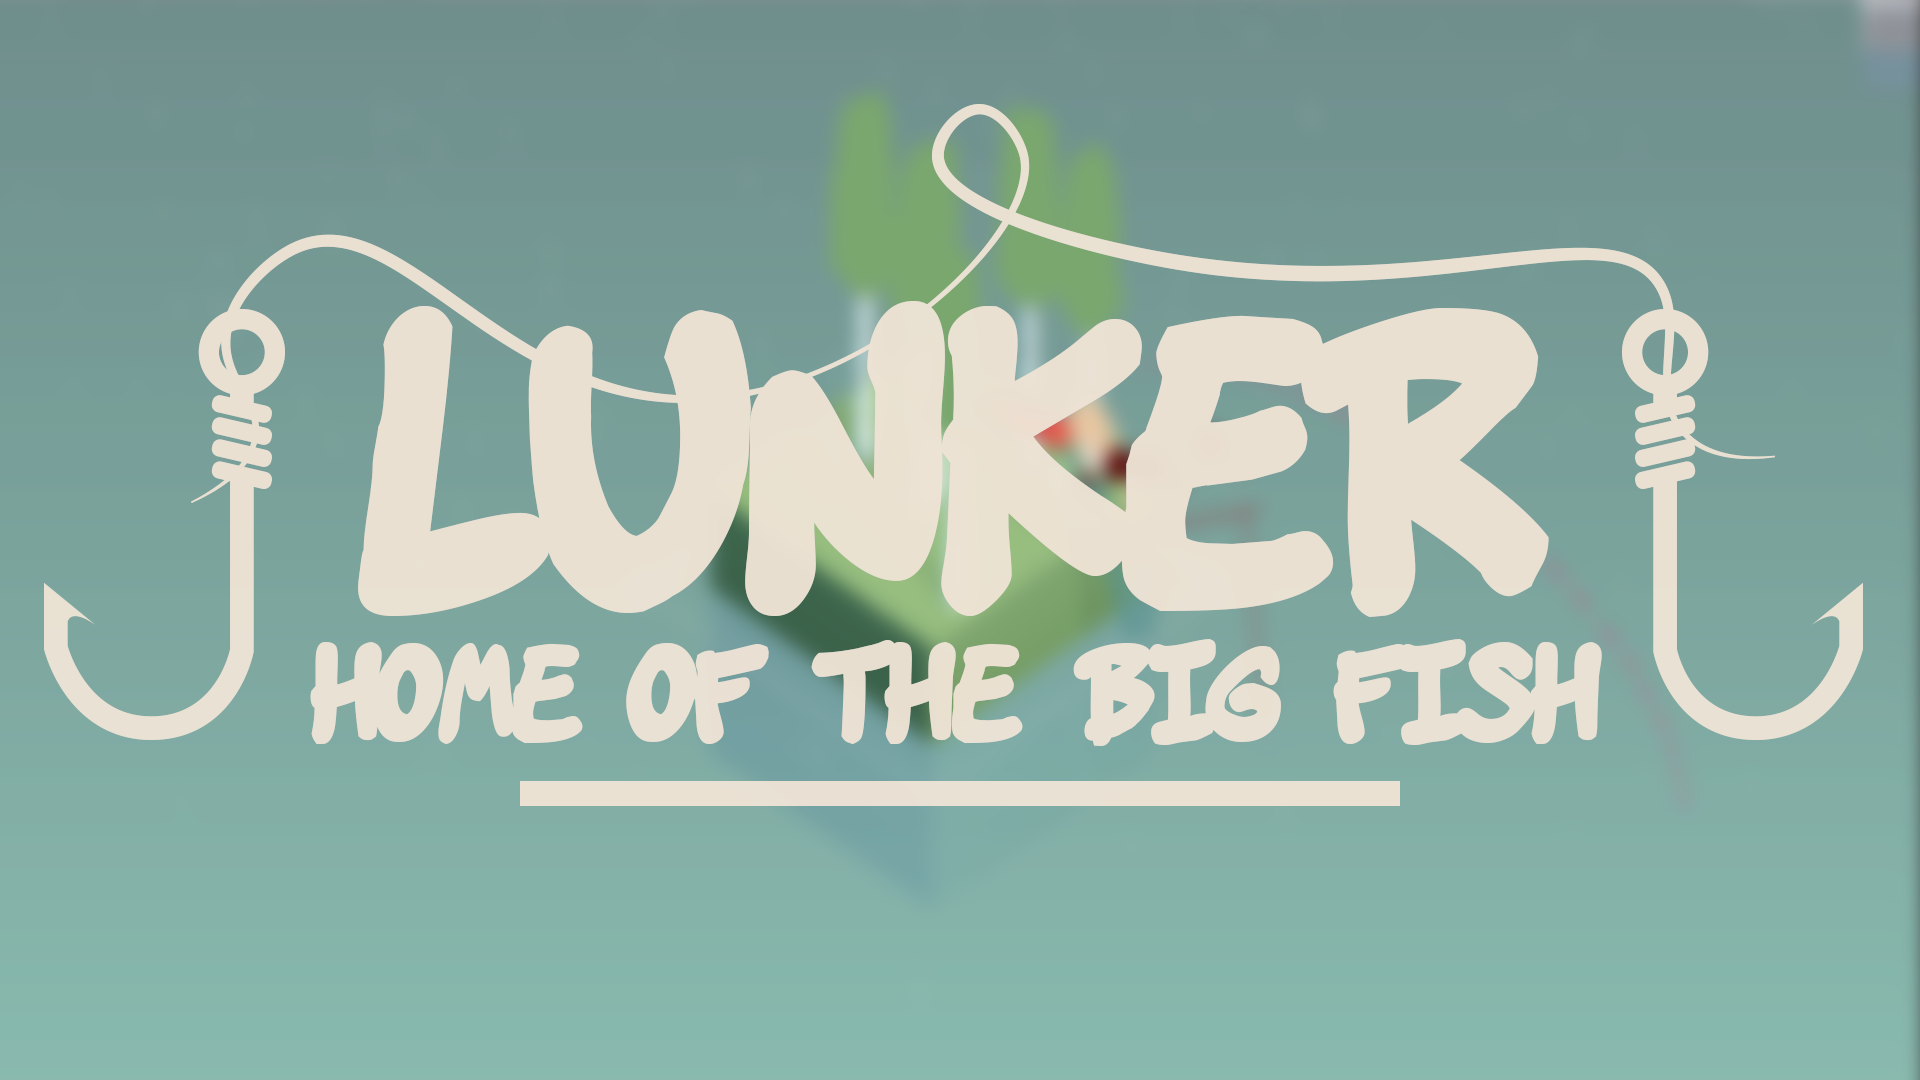 Lunker- Home of the big fish by MiiRo for Fishing Jam 2 